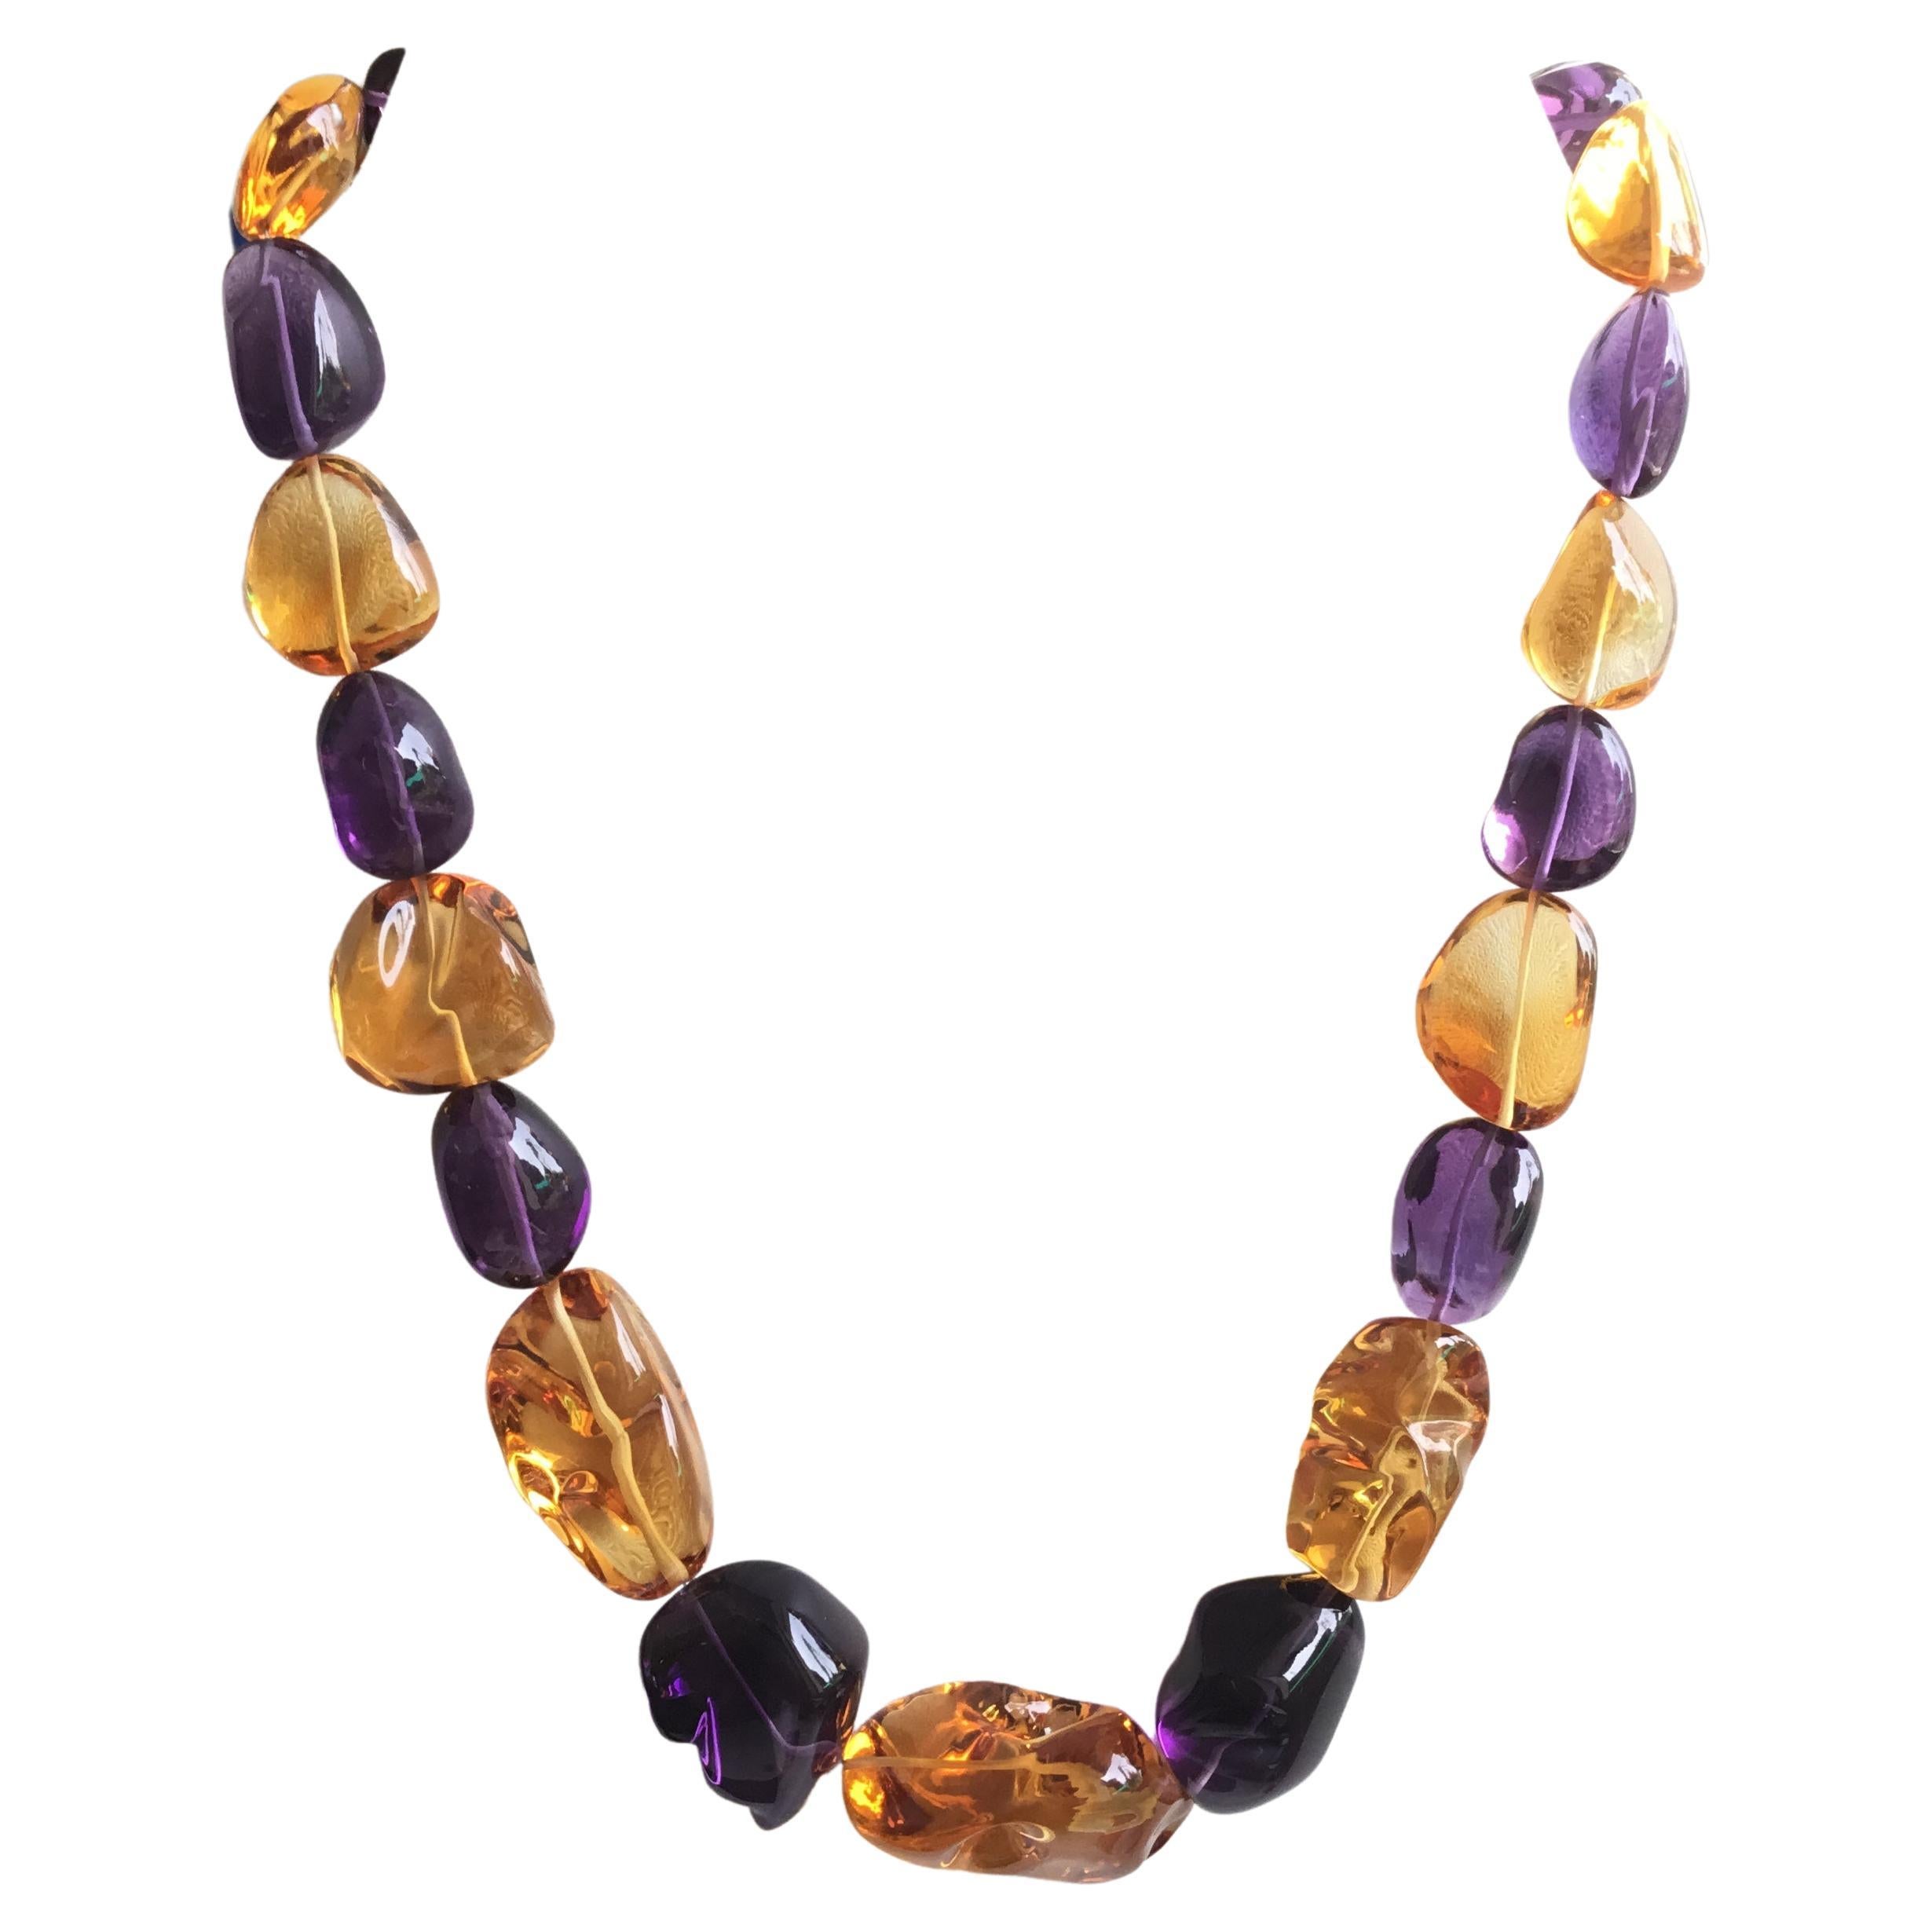 Top Quality Citrine & Amethyst Plain Tumbled Natural Gemstone Necklace